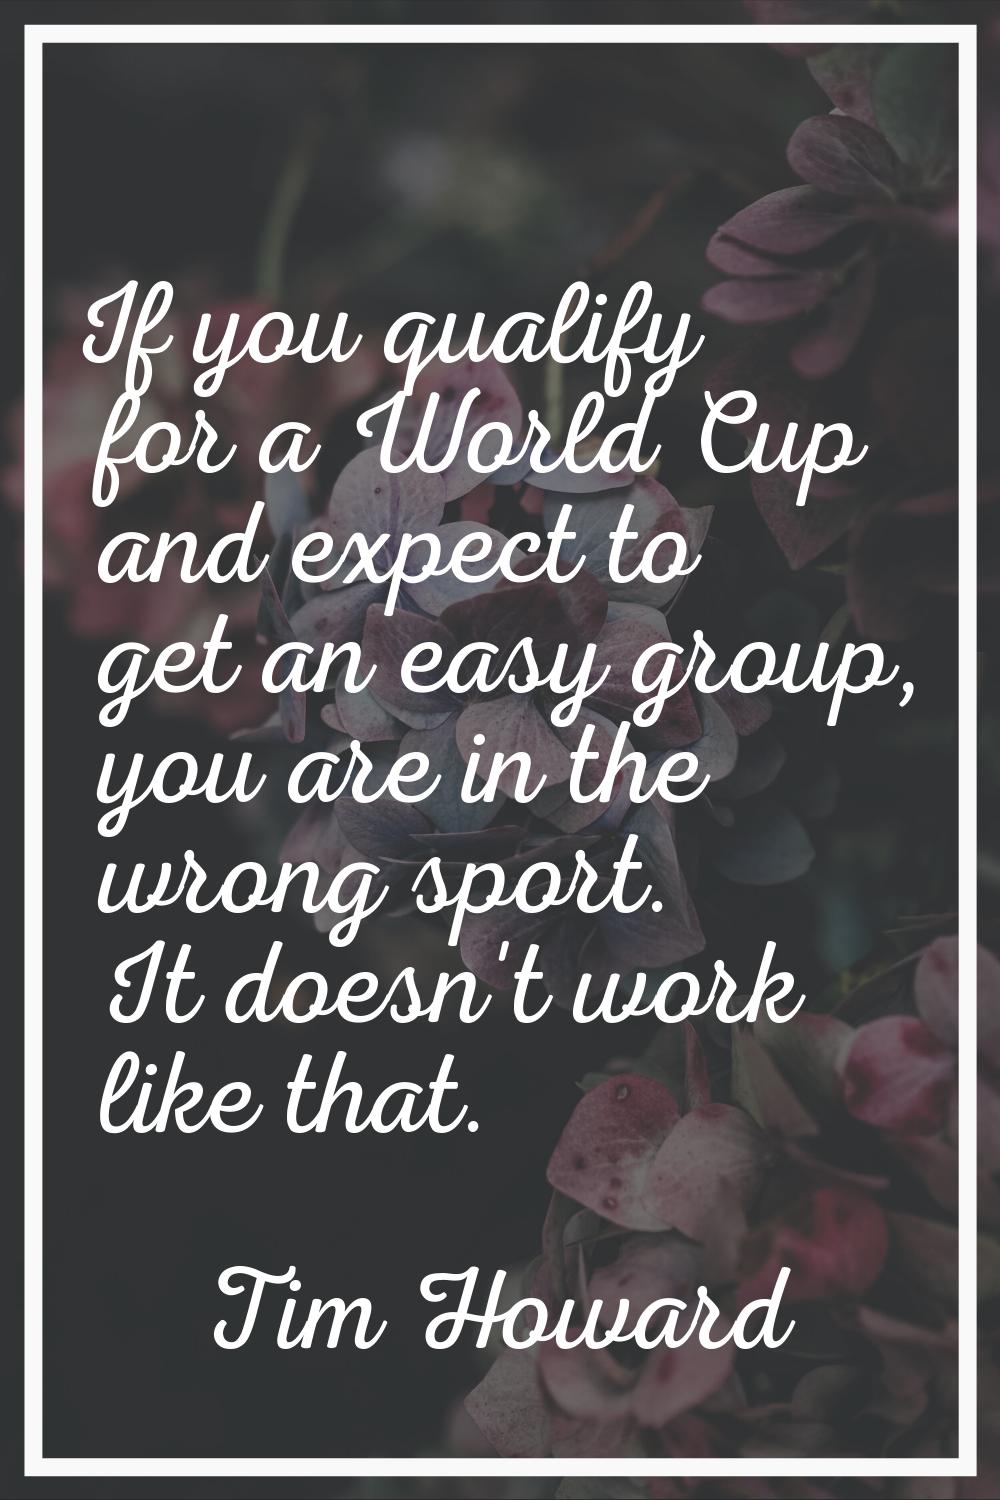 If you qualify for a World Cup and expect to get an easy group, you are in the wrong sport. It does